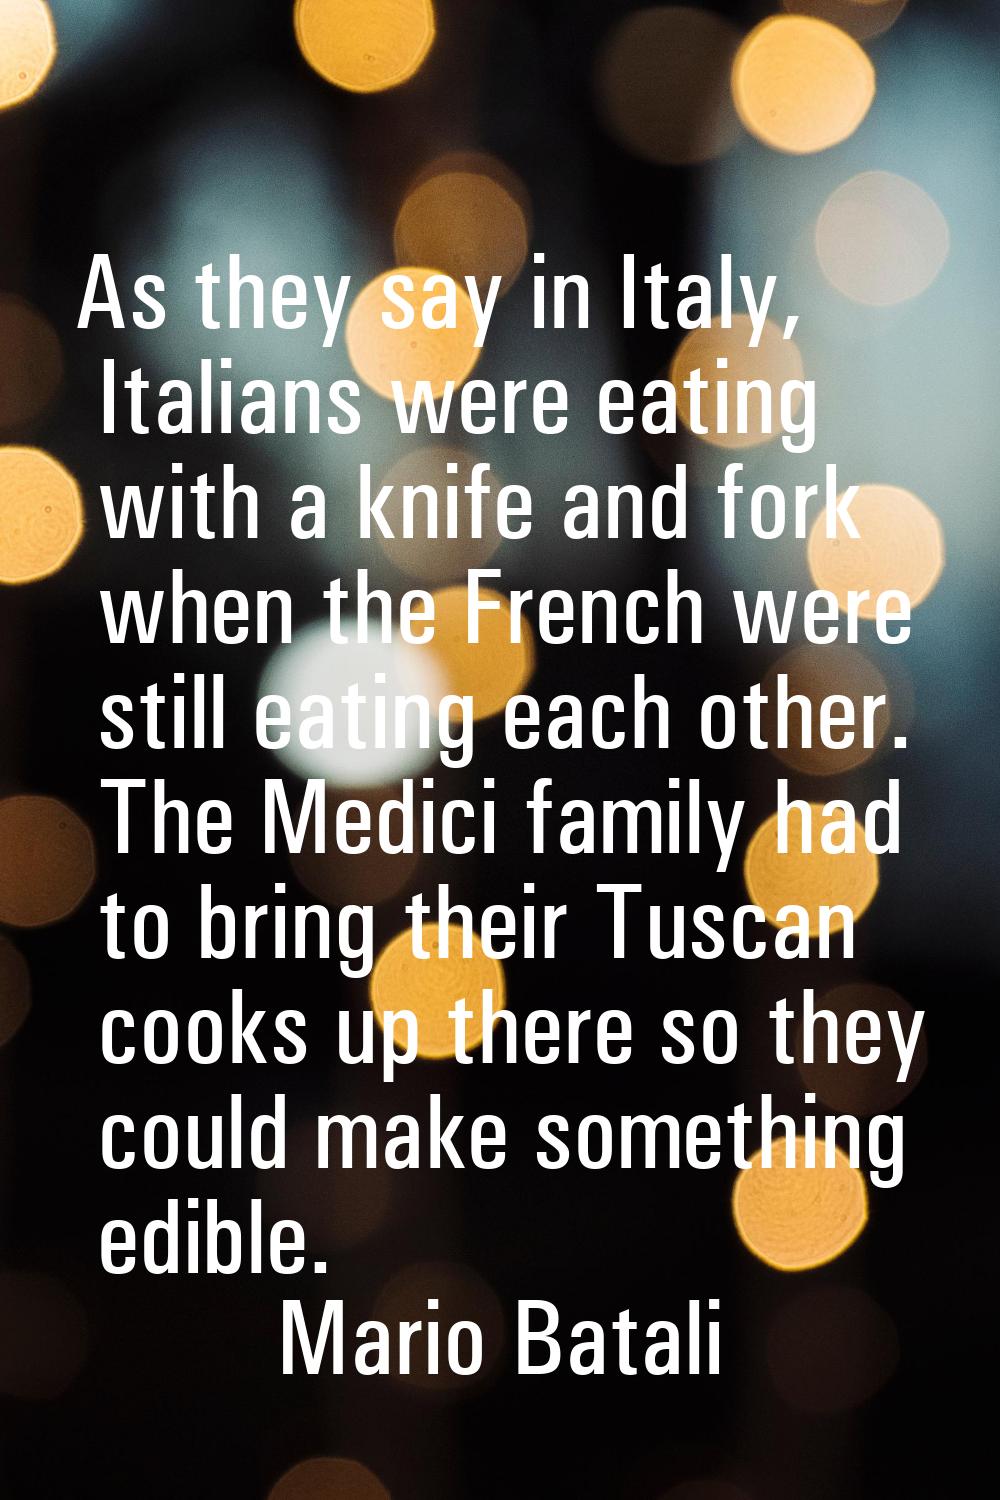 As they say in Italy, Italians were eating with a knife and fork when the French were still eating 